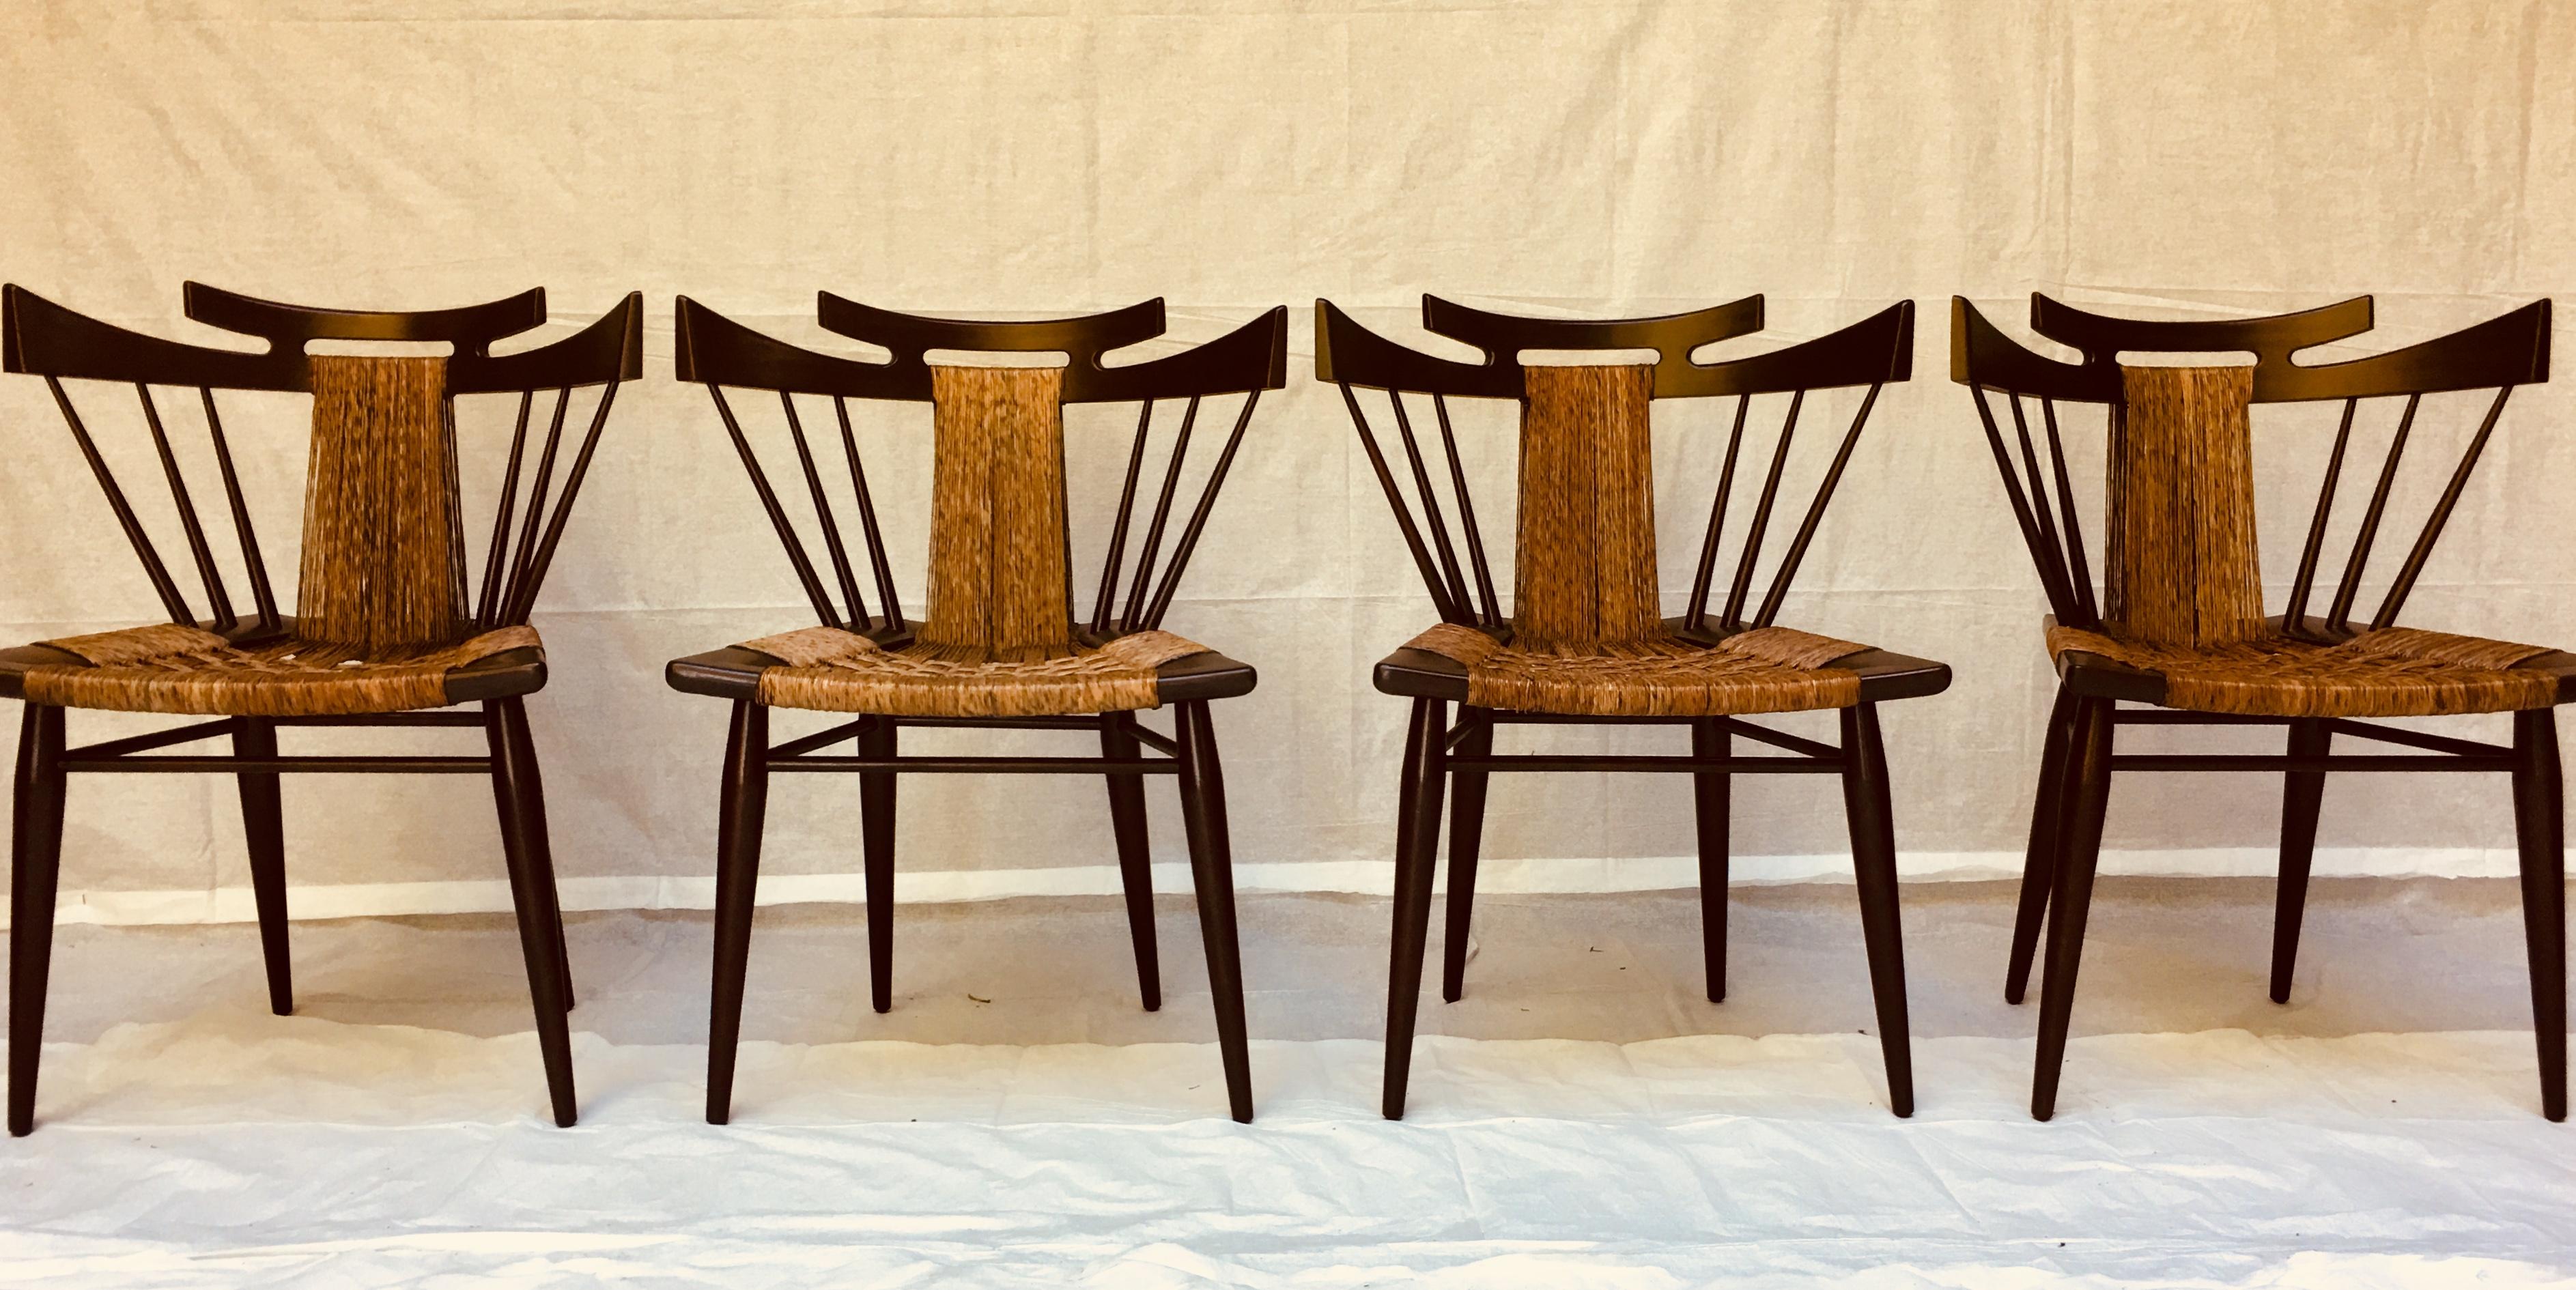 Edmond Spence Six Piece Mahogany Dinning Set for Industria Mueblera, S.A. 1950s  For Sale 3